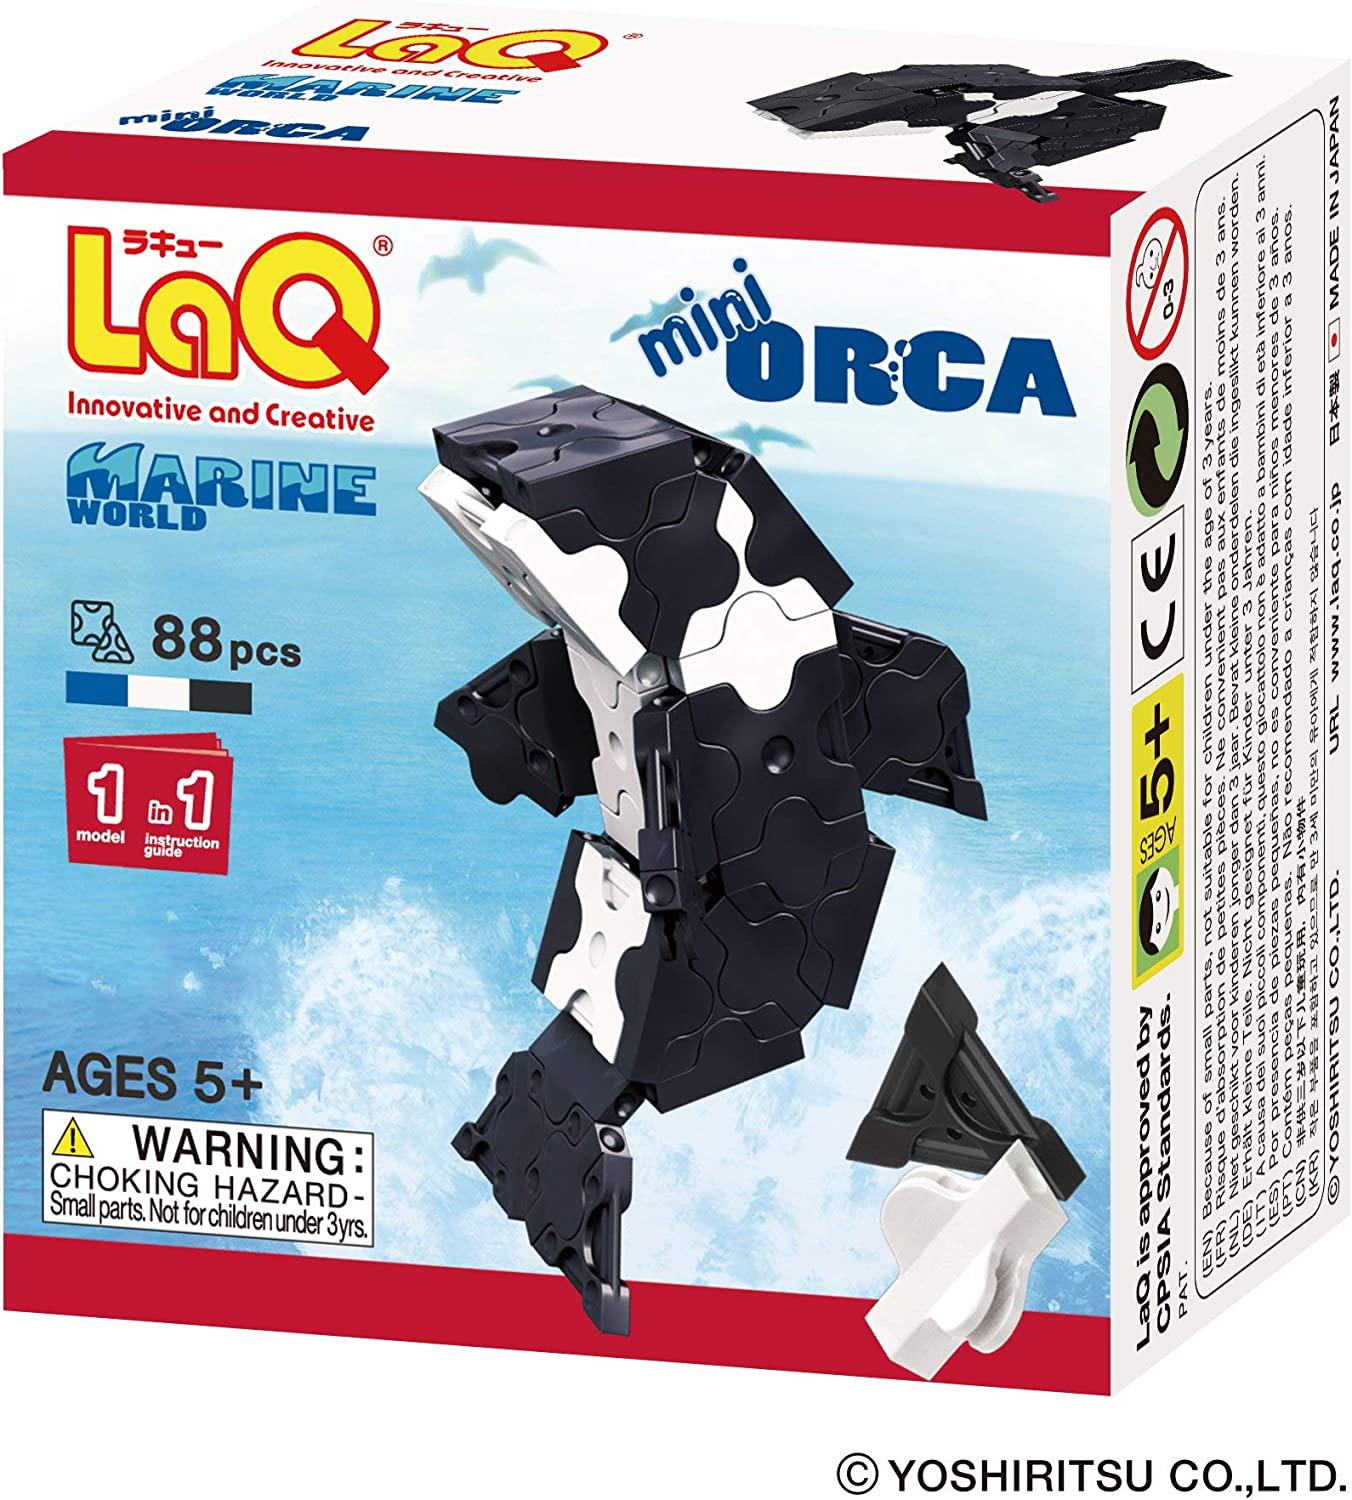 LaQ, LaQ Marine World Mini ORCA - 1 Model, 88 Pieces | Construction Stem Set | Educational Engineering Toy for Ages 5, 6, 7, 8, 9, 10 Year Old Boys and Girls | Best Kids Fun Building kit